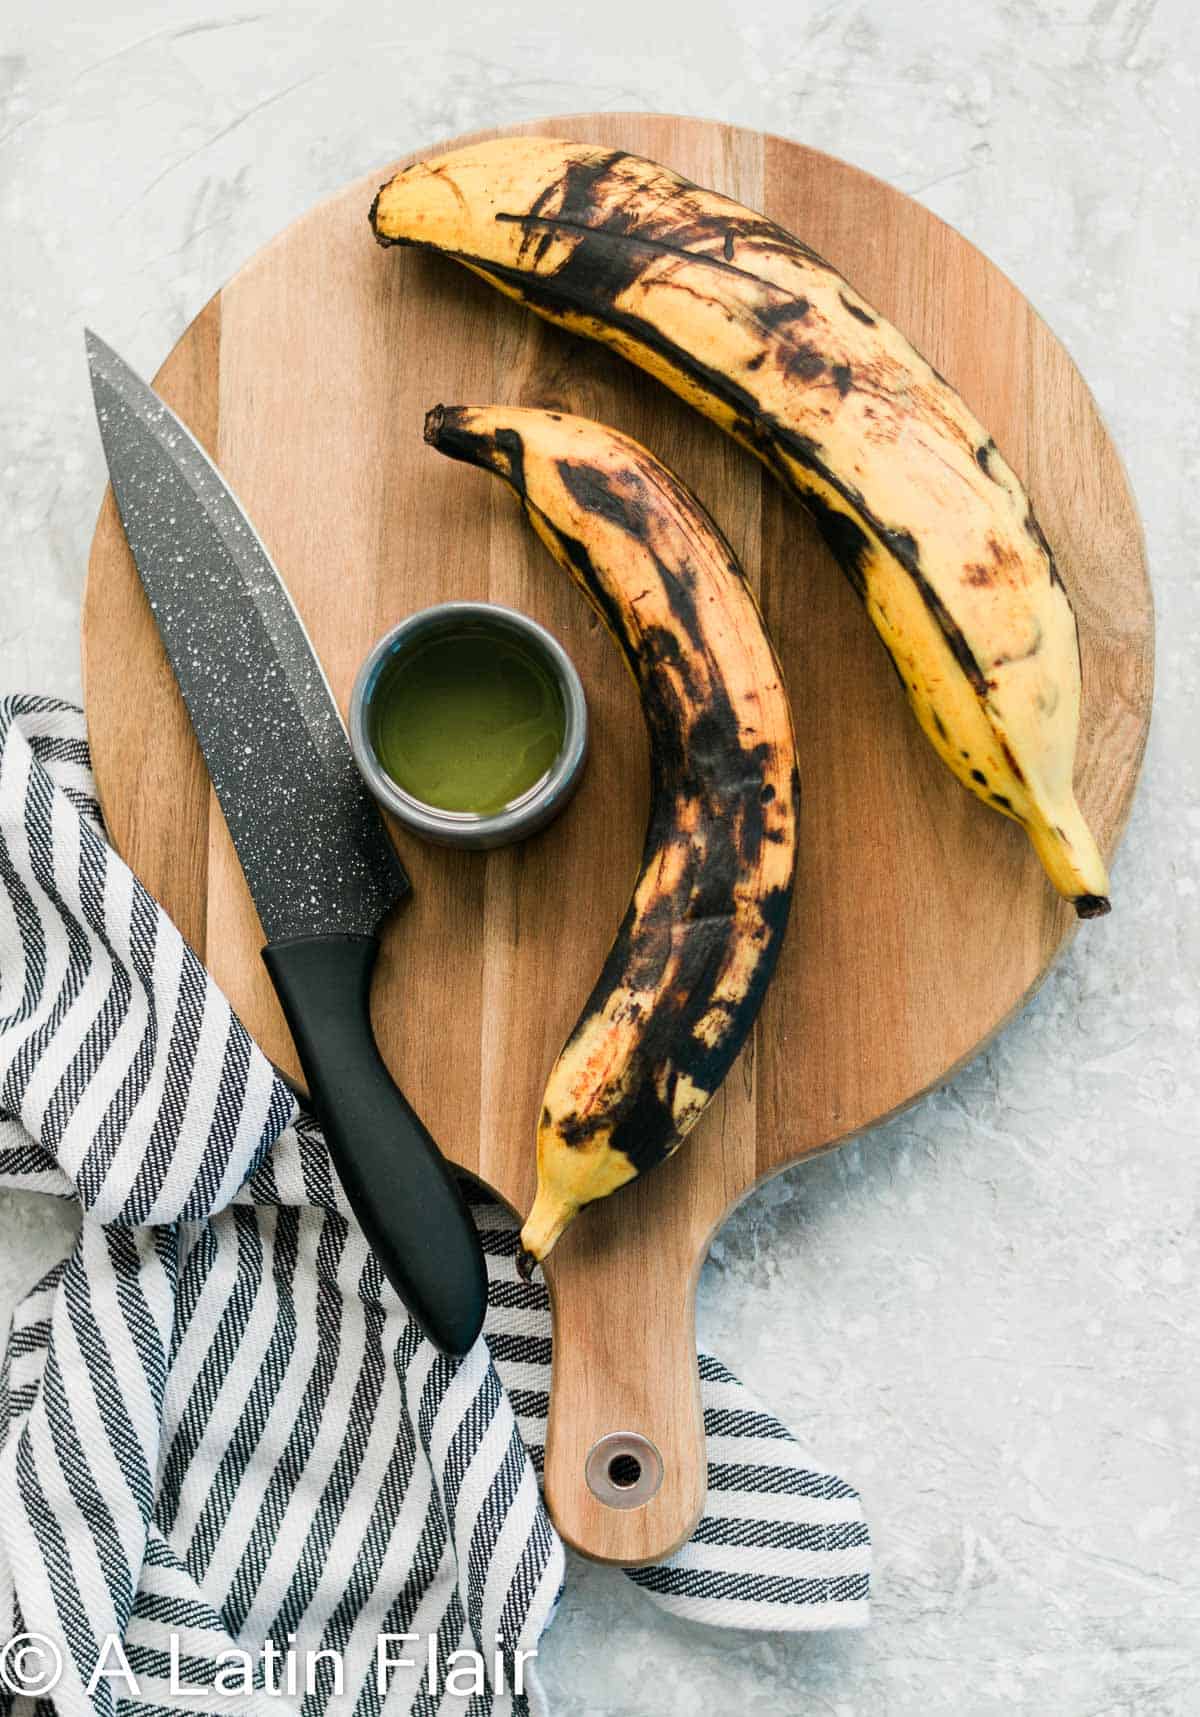 Just-Ripe-yellow-Plantains-with-black-spots-on-cutting-board